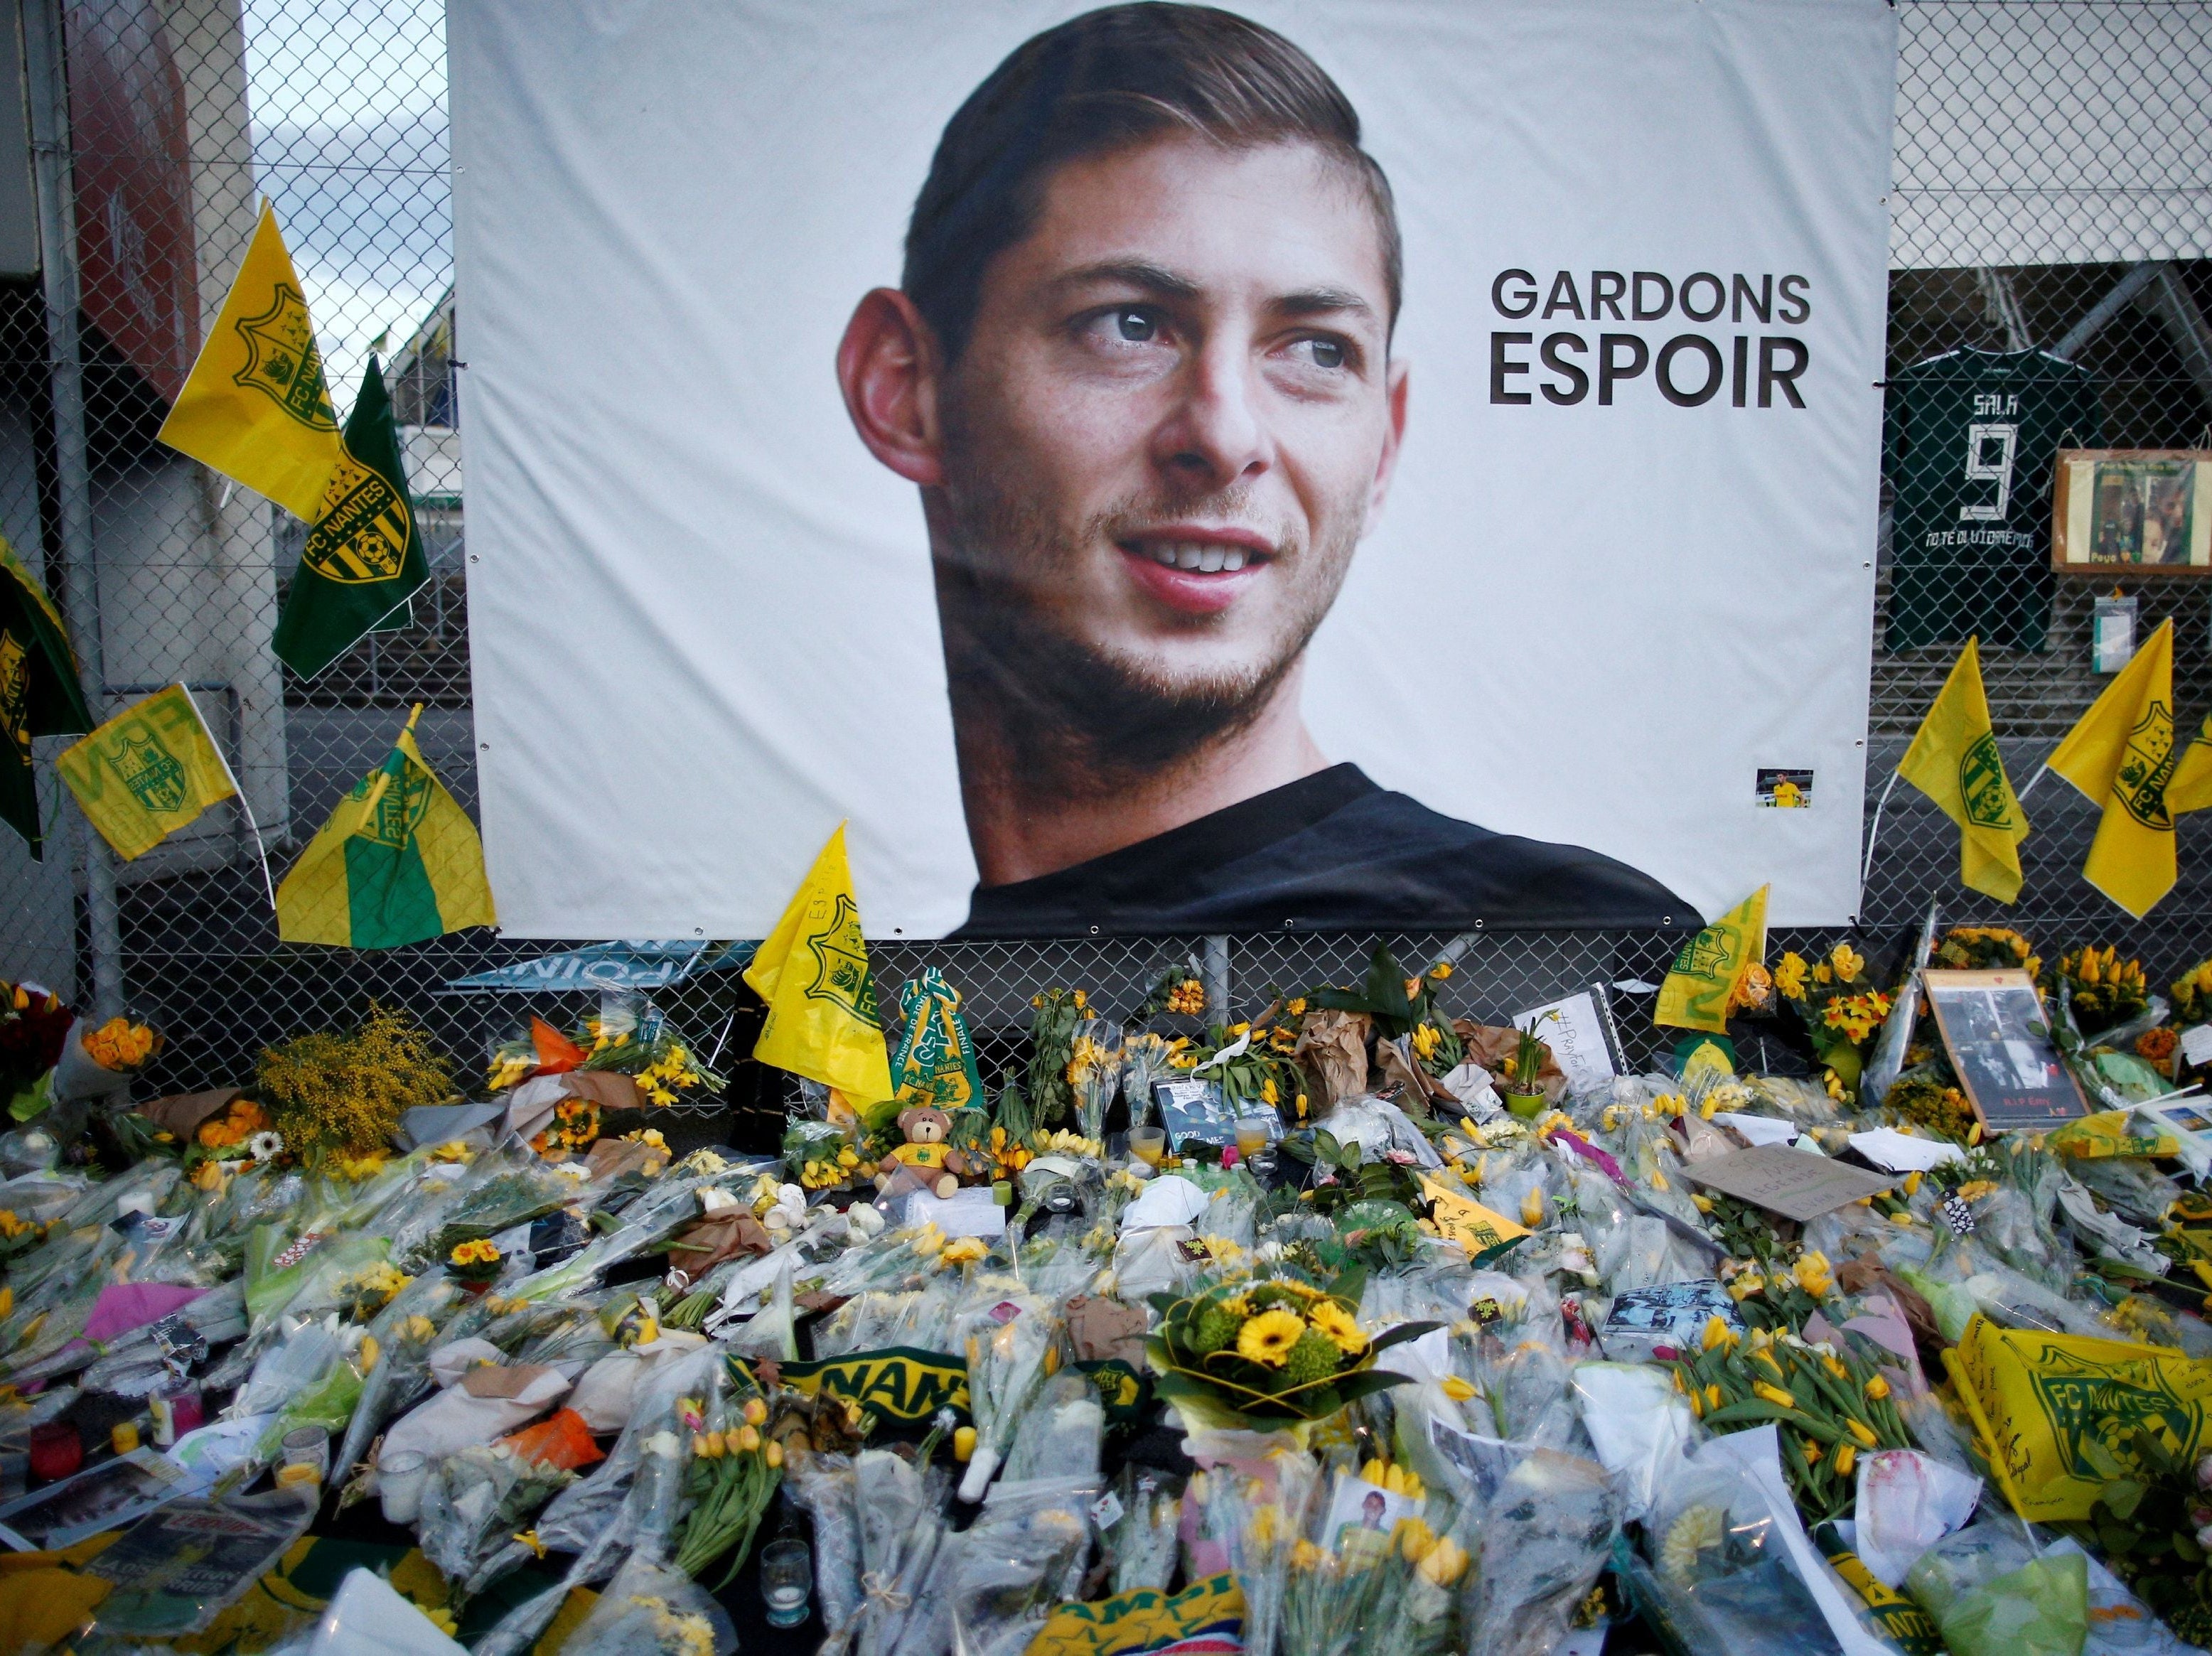 Emiliano Sala died in a plane crash in January 2019